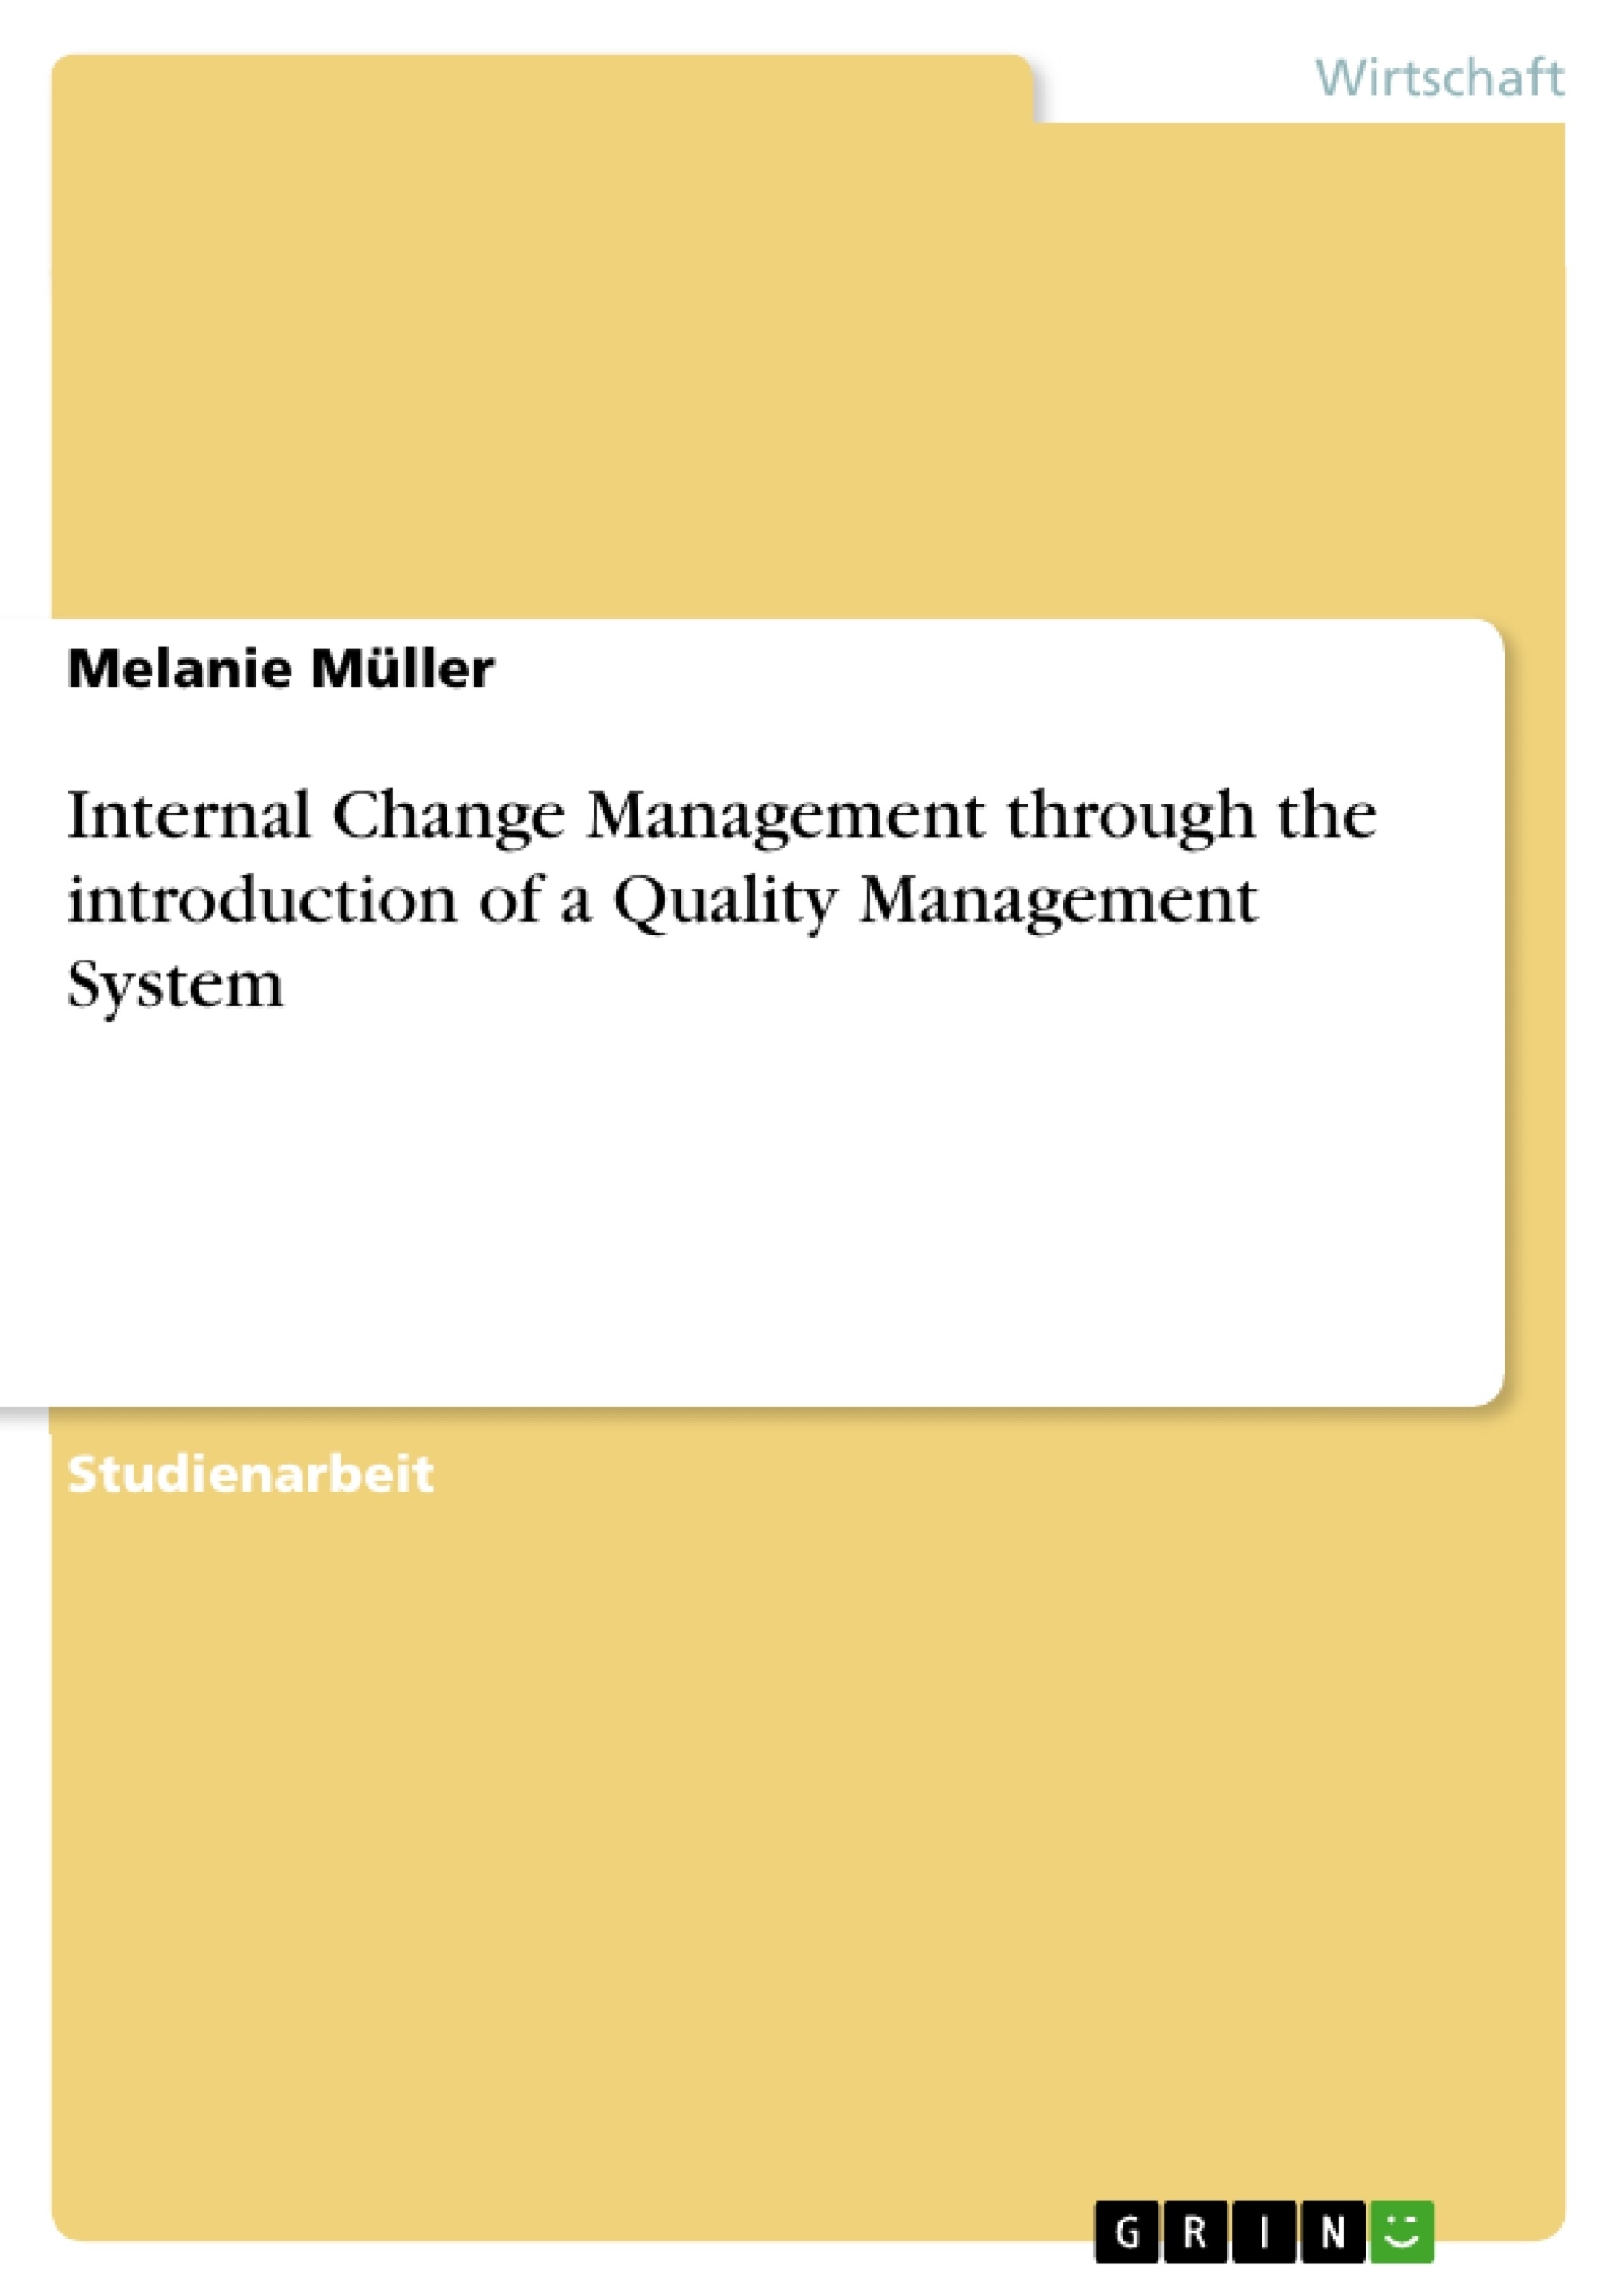 Title: Internal Change Management through the introduction of a Quality Management System